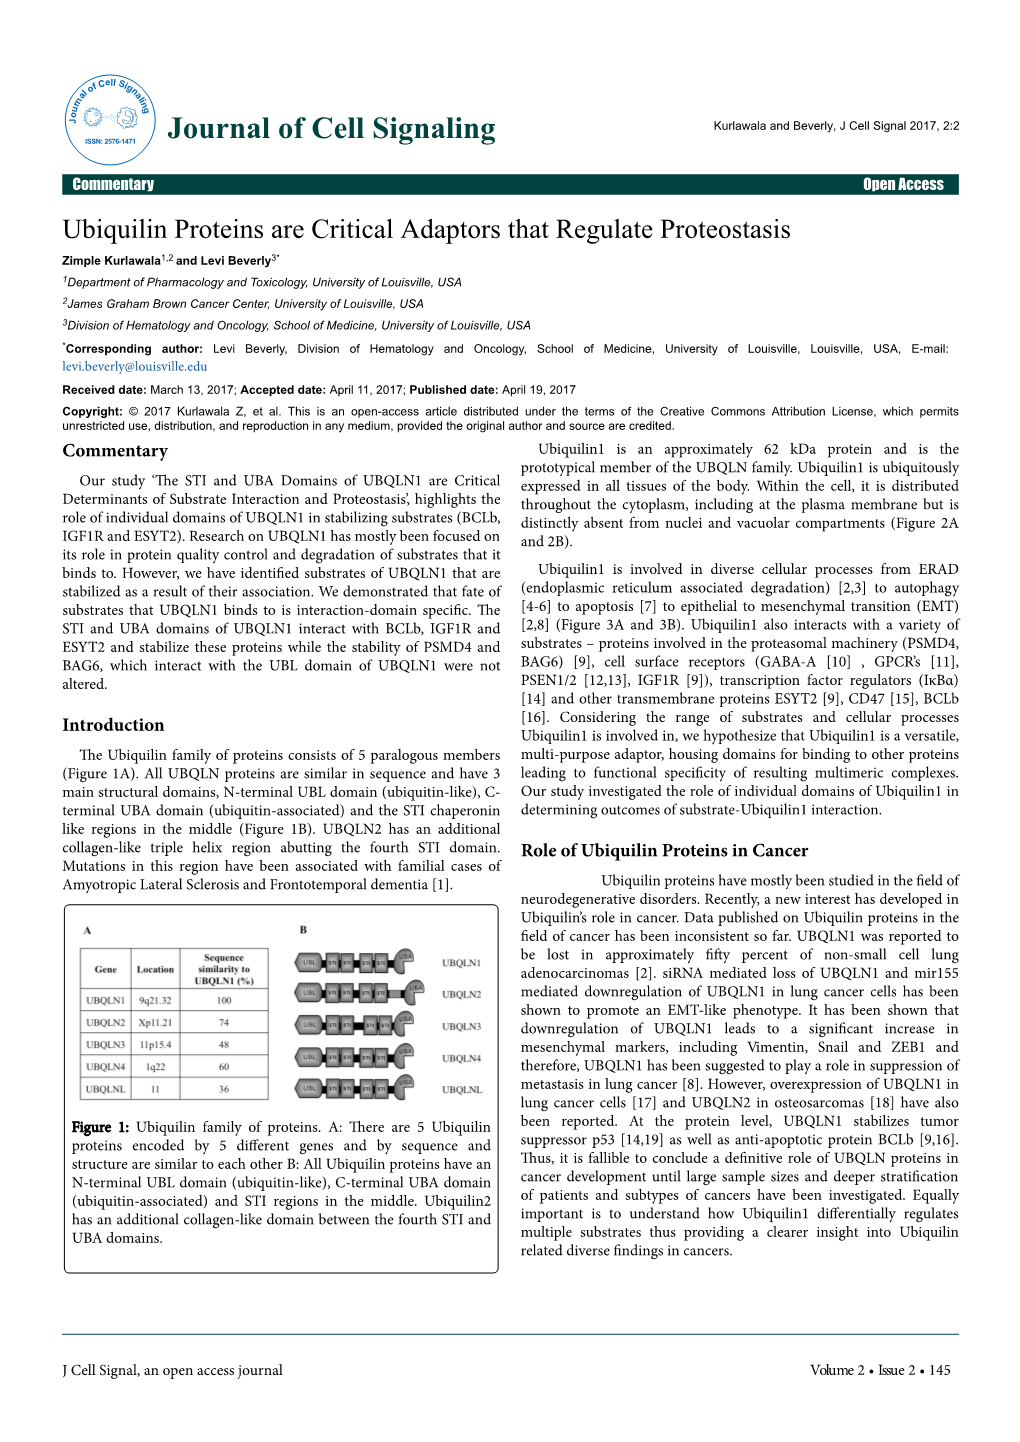 Ubiquilin Proteins Are Critical Adaptors That Regulate Proteostasis